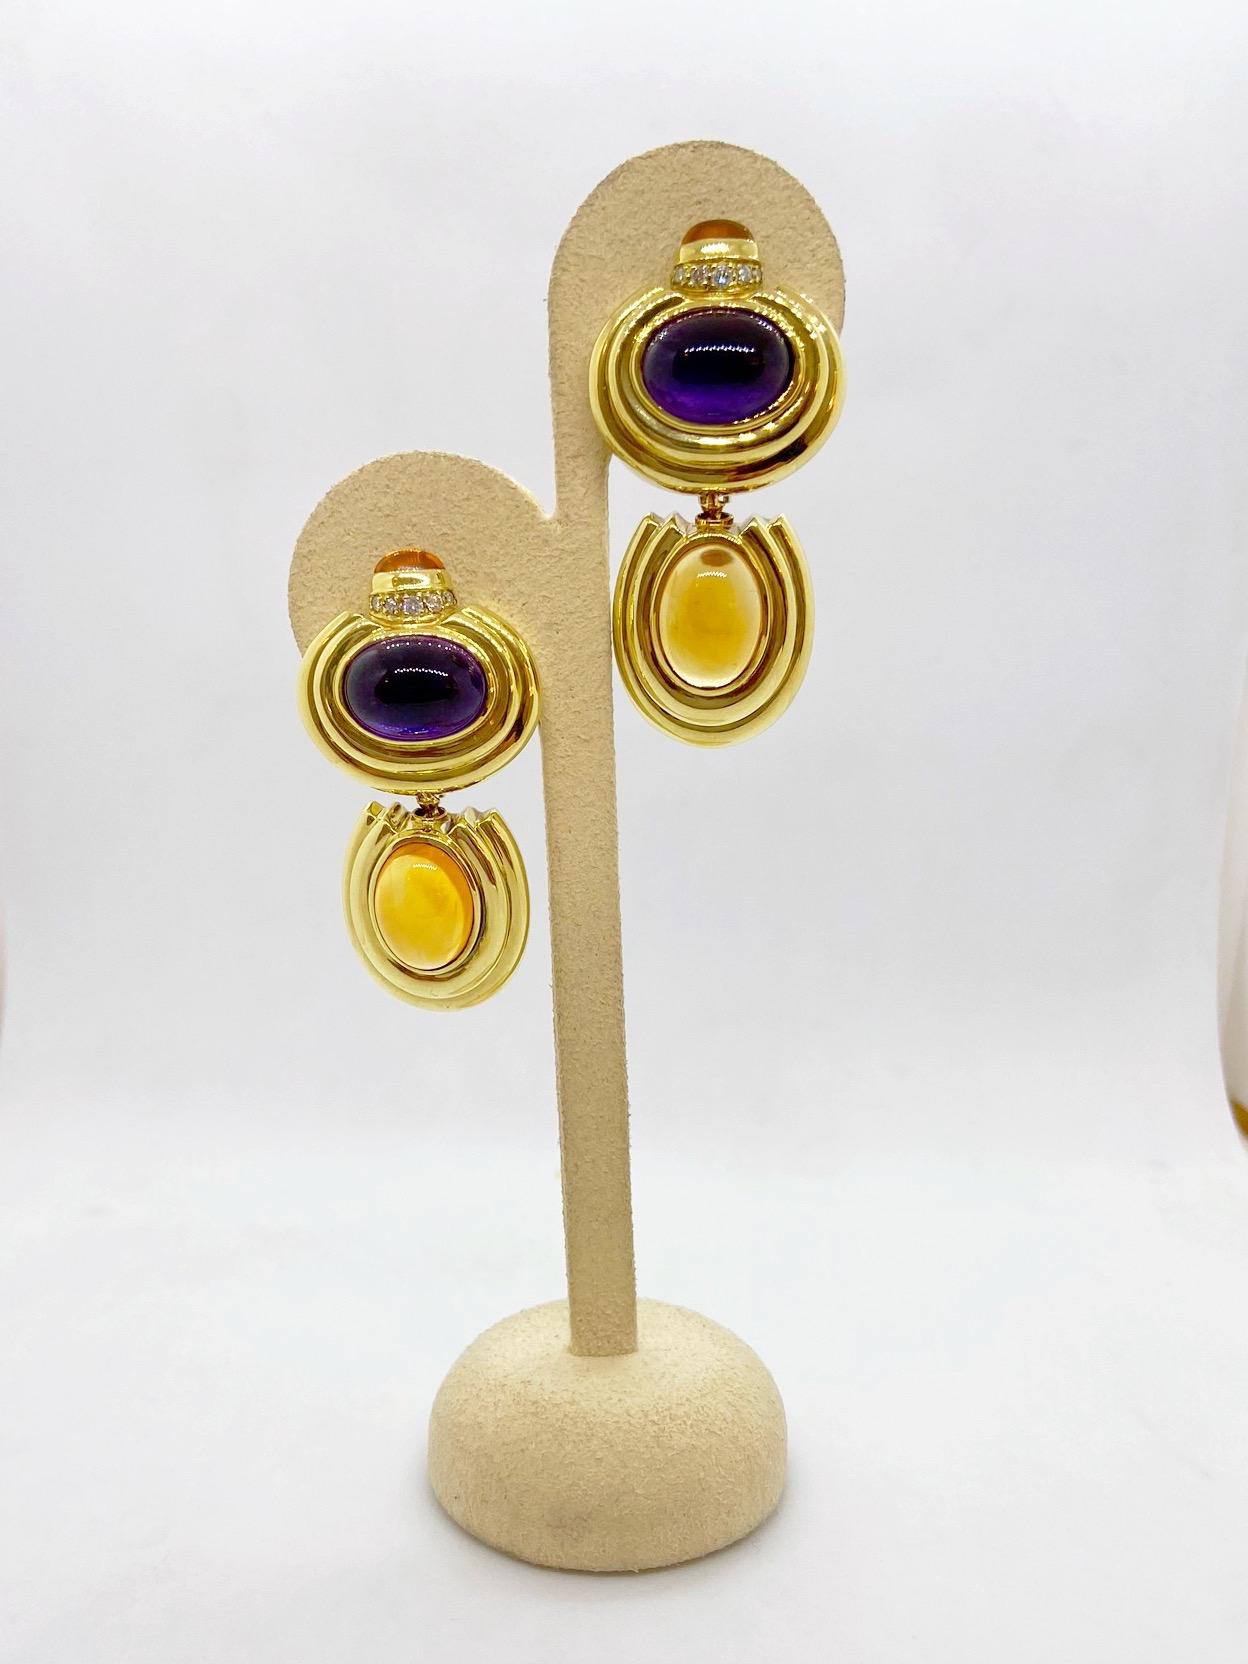 Crafted by Lagos in 18 karat yellow gold, these ear clips feature a cabochon Amethyst and Citrine in each ear. The earrings are clip on, but a post may be added for pierced ears. The earrings measure almost 2